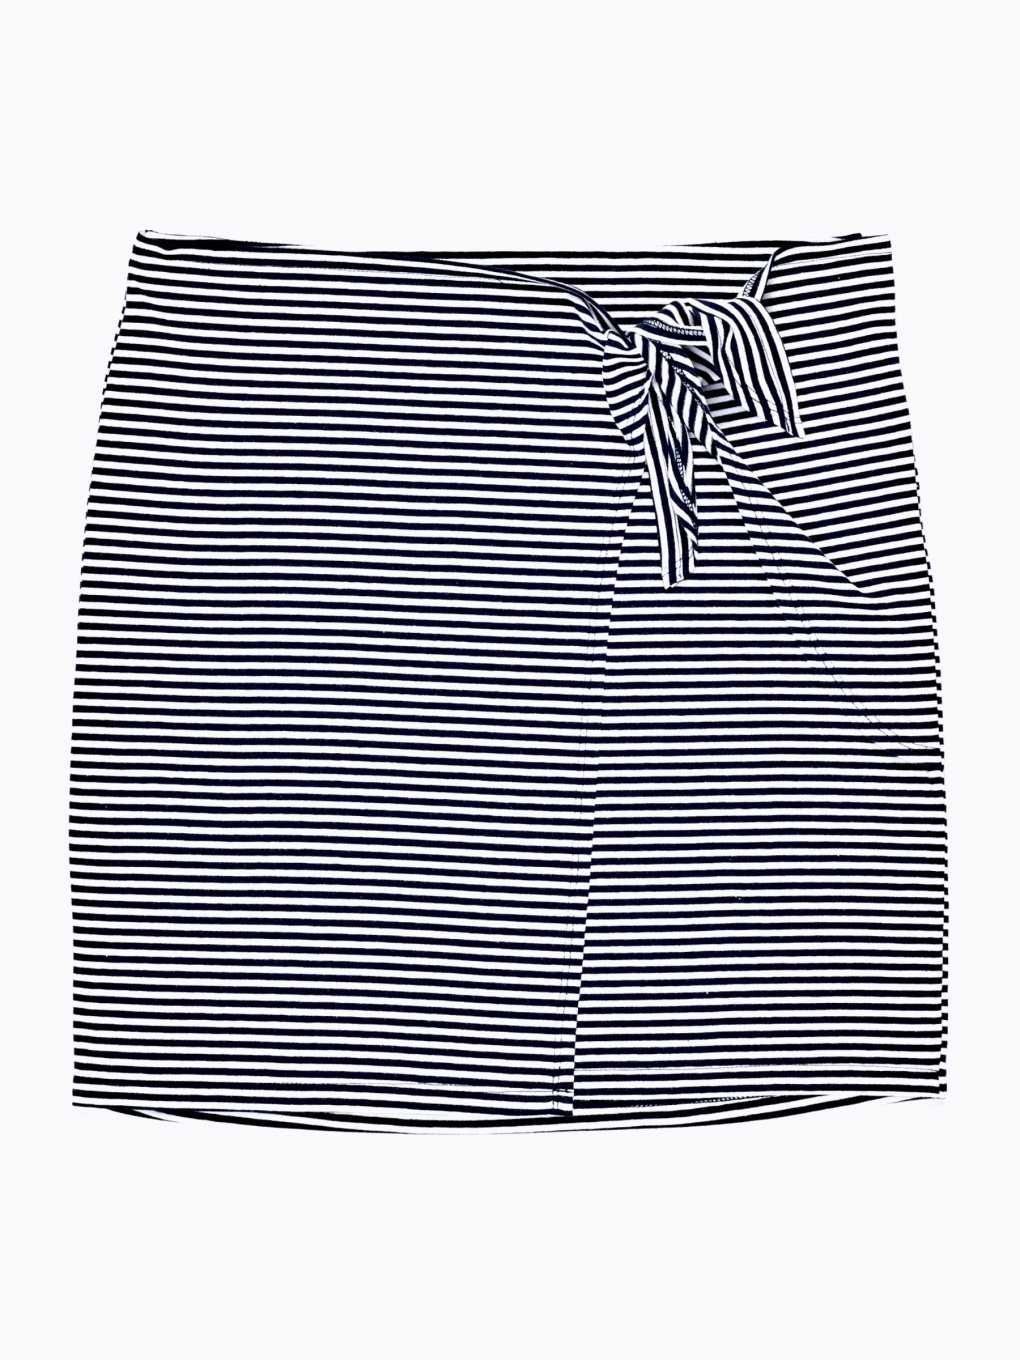 Knot front striped skirt